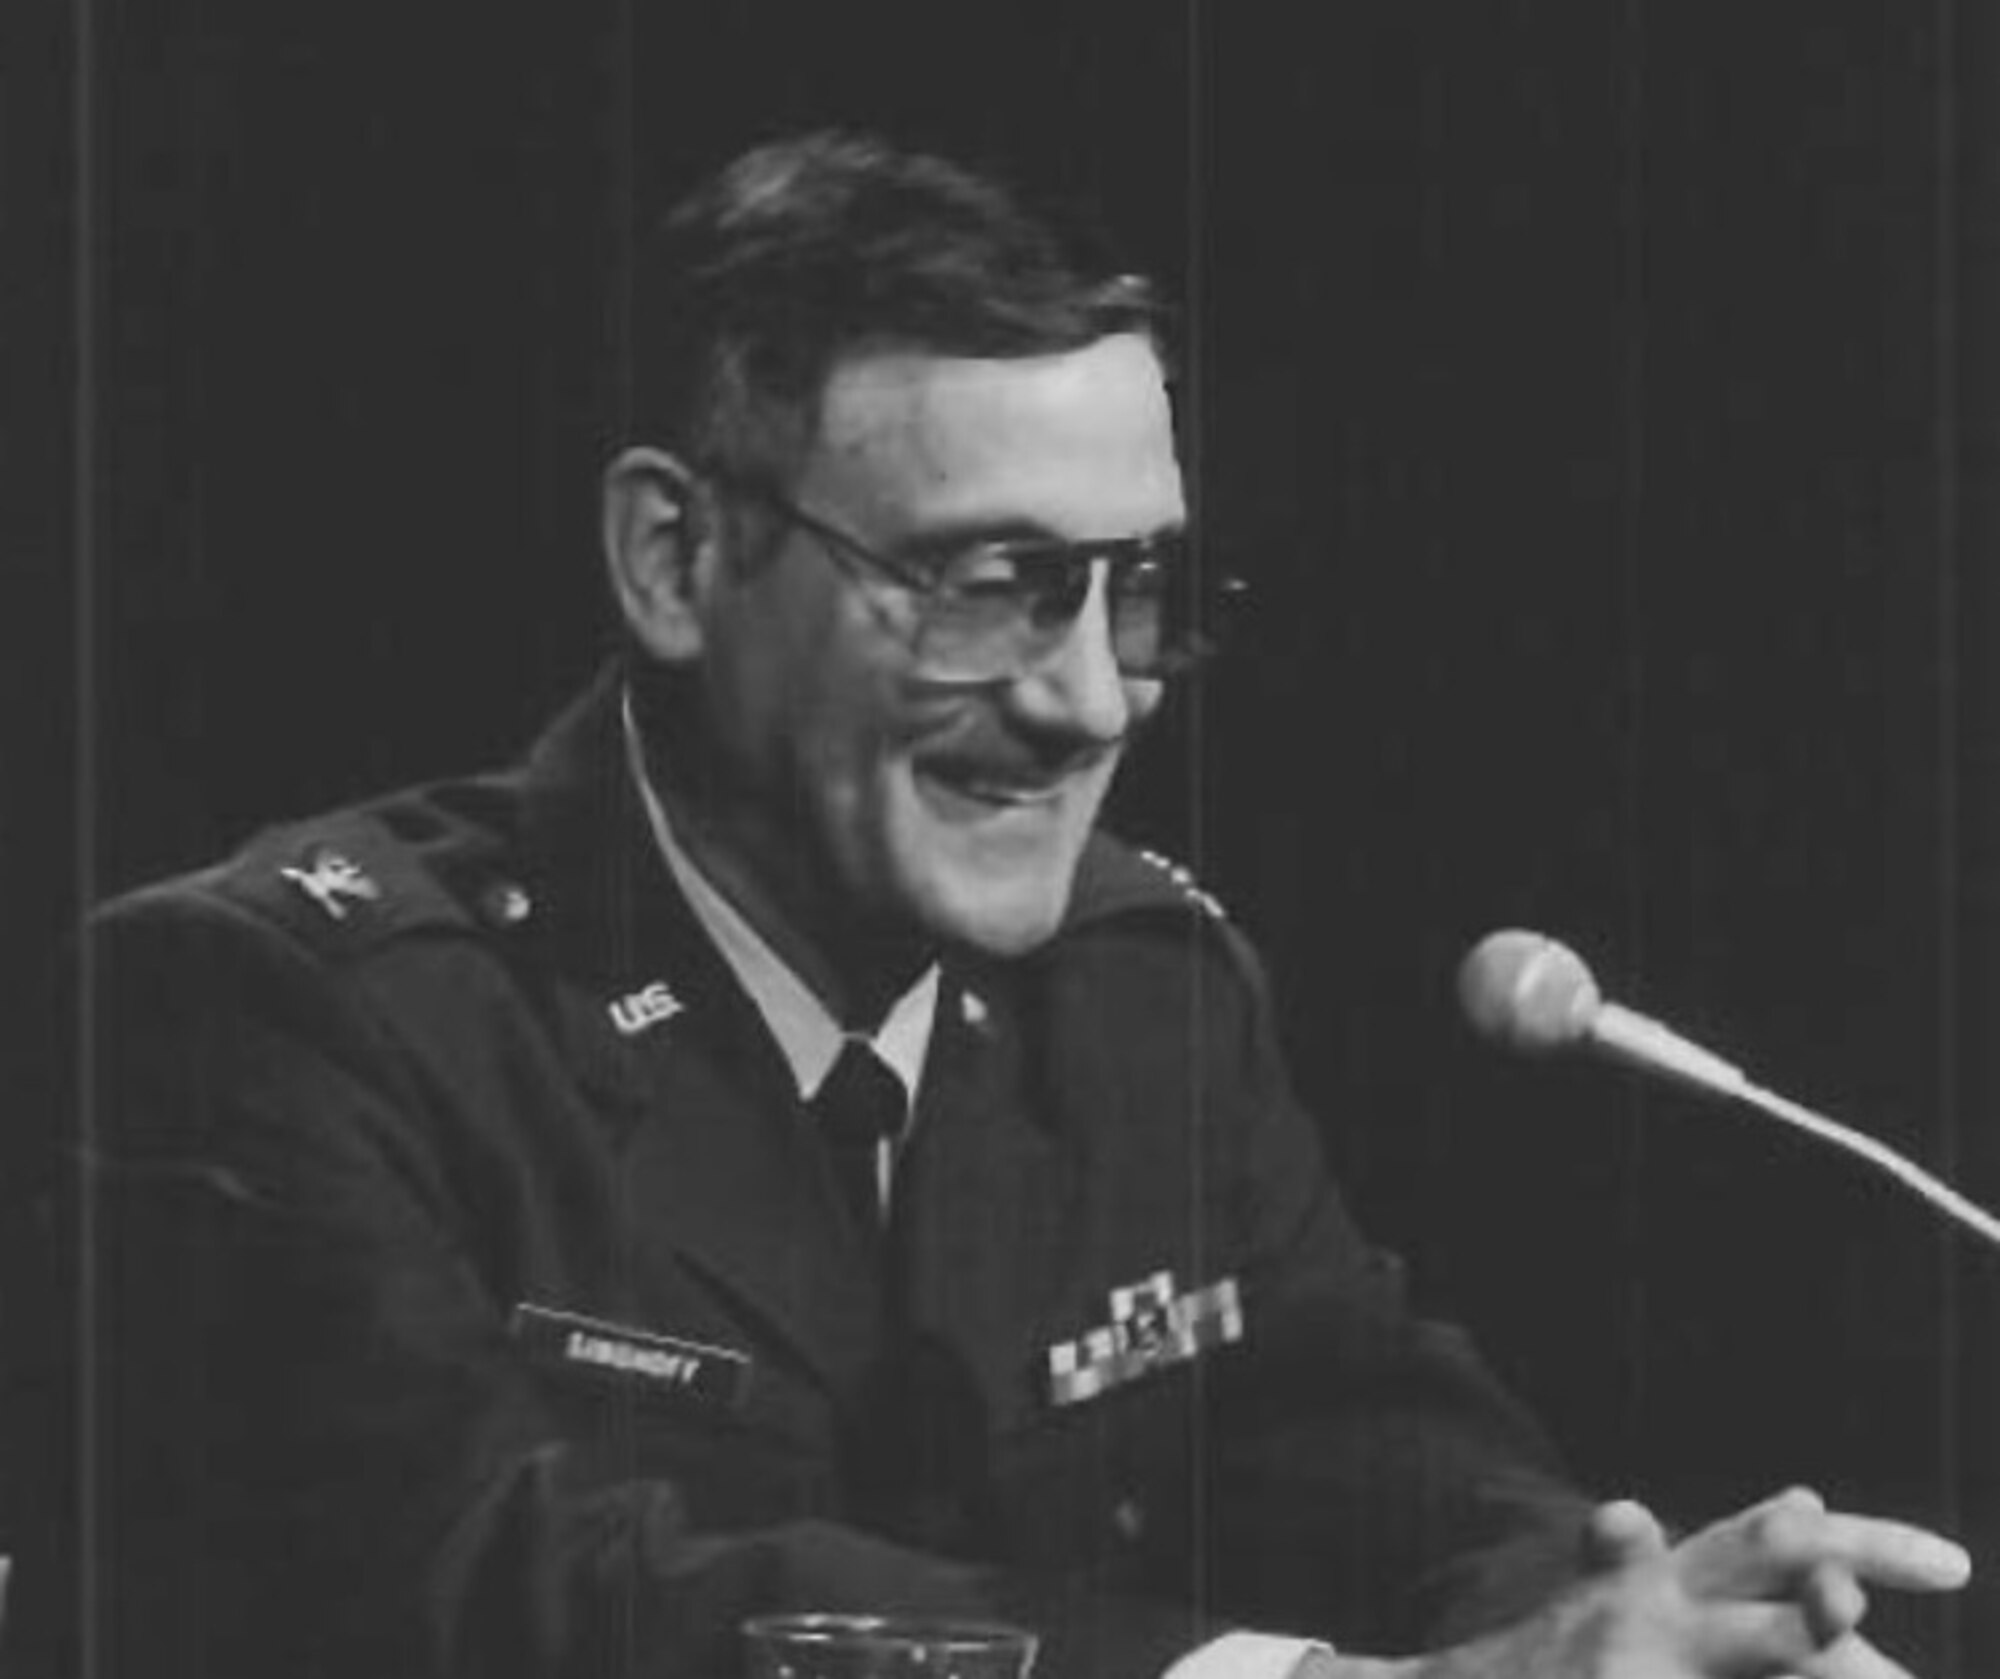 Col. Forest A. Singhoff, OSI Commander, speaking at a Pentagon conference in 1978 (U.S. Air Force photo).